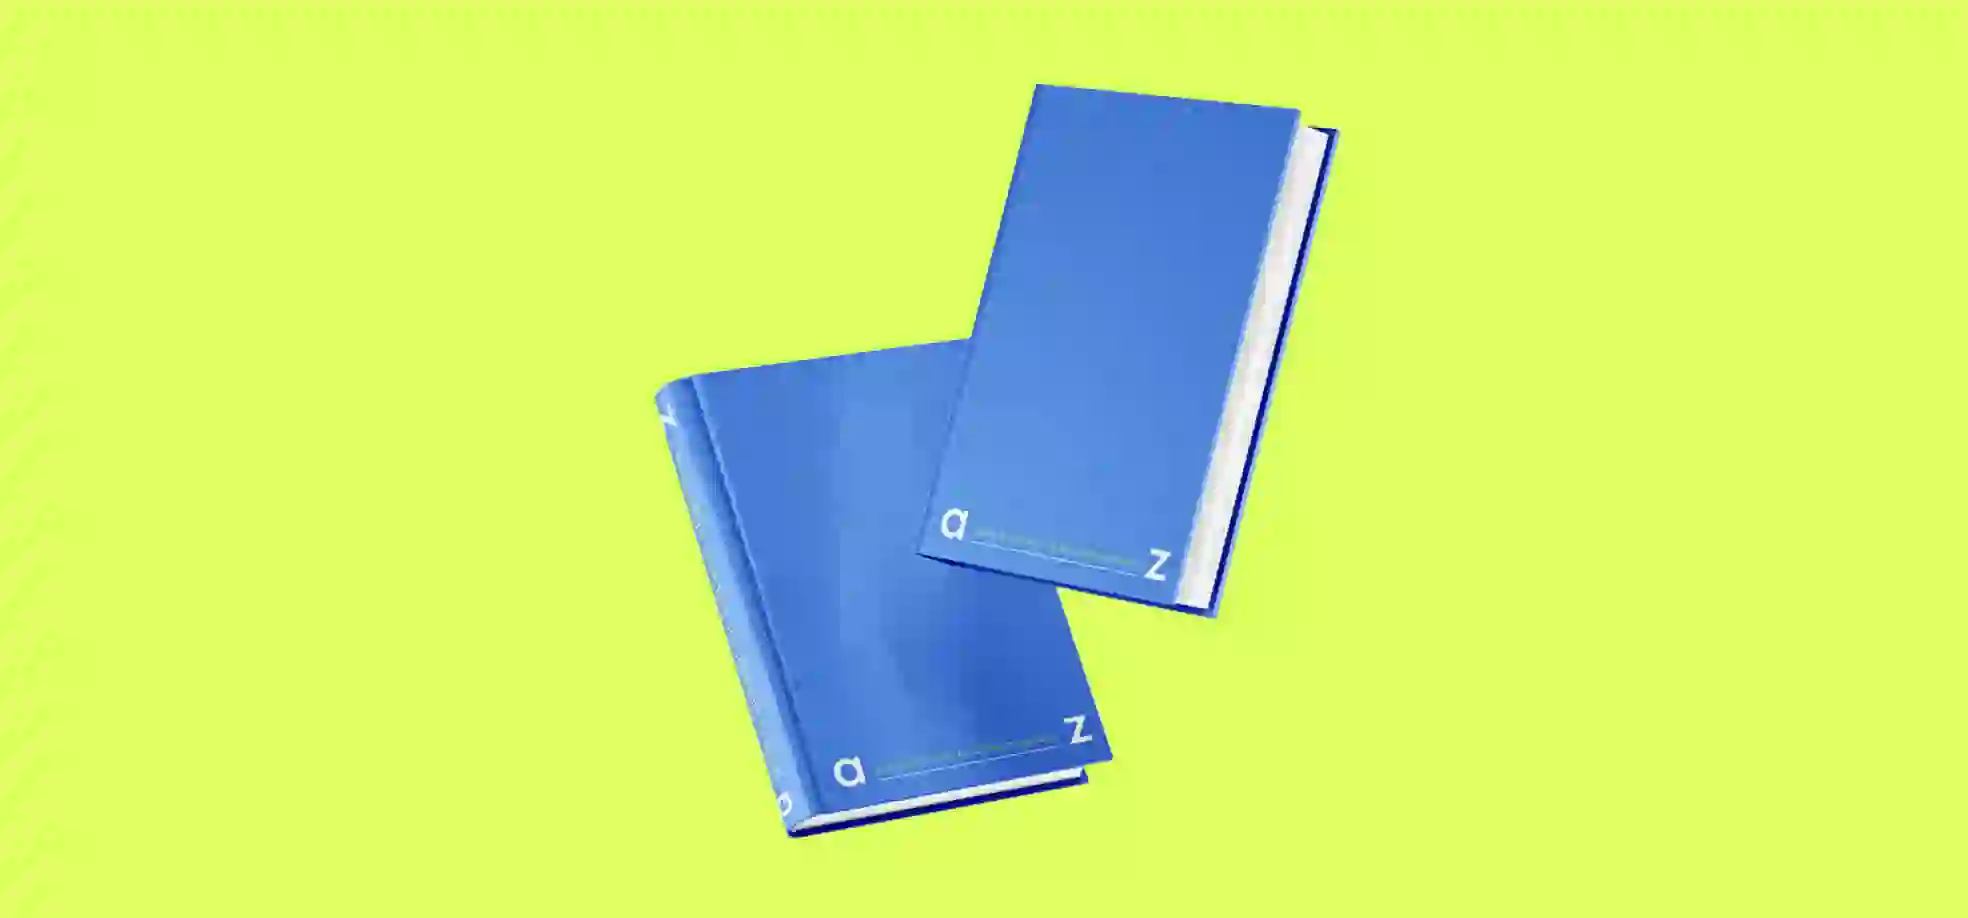 2 blue books illustration on a green background 